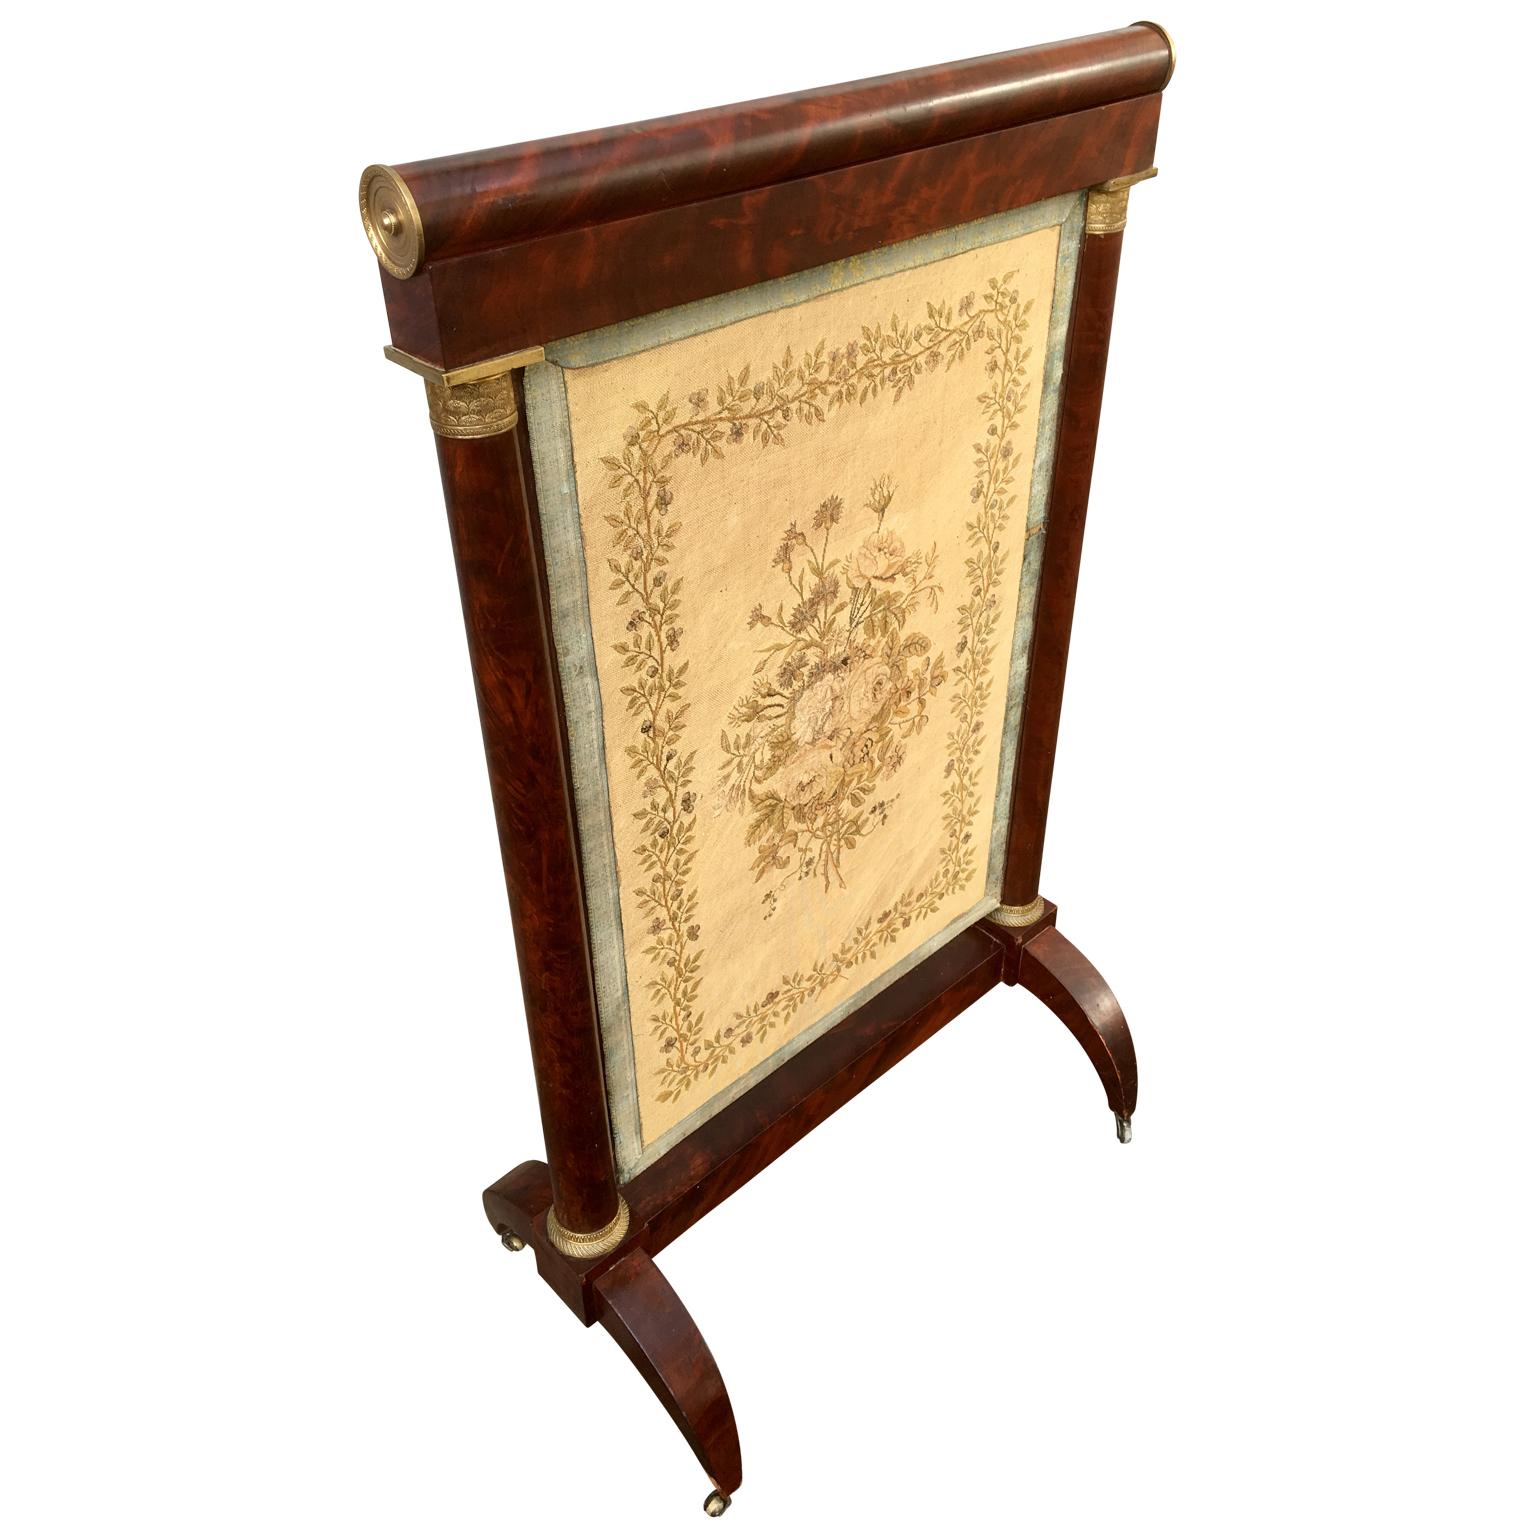 Early French 19th Century Empire Mahogany and Gilt Bronze Firescreen In Good Condition For Sale In Haddonfield, NJ